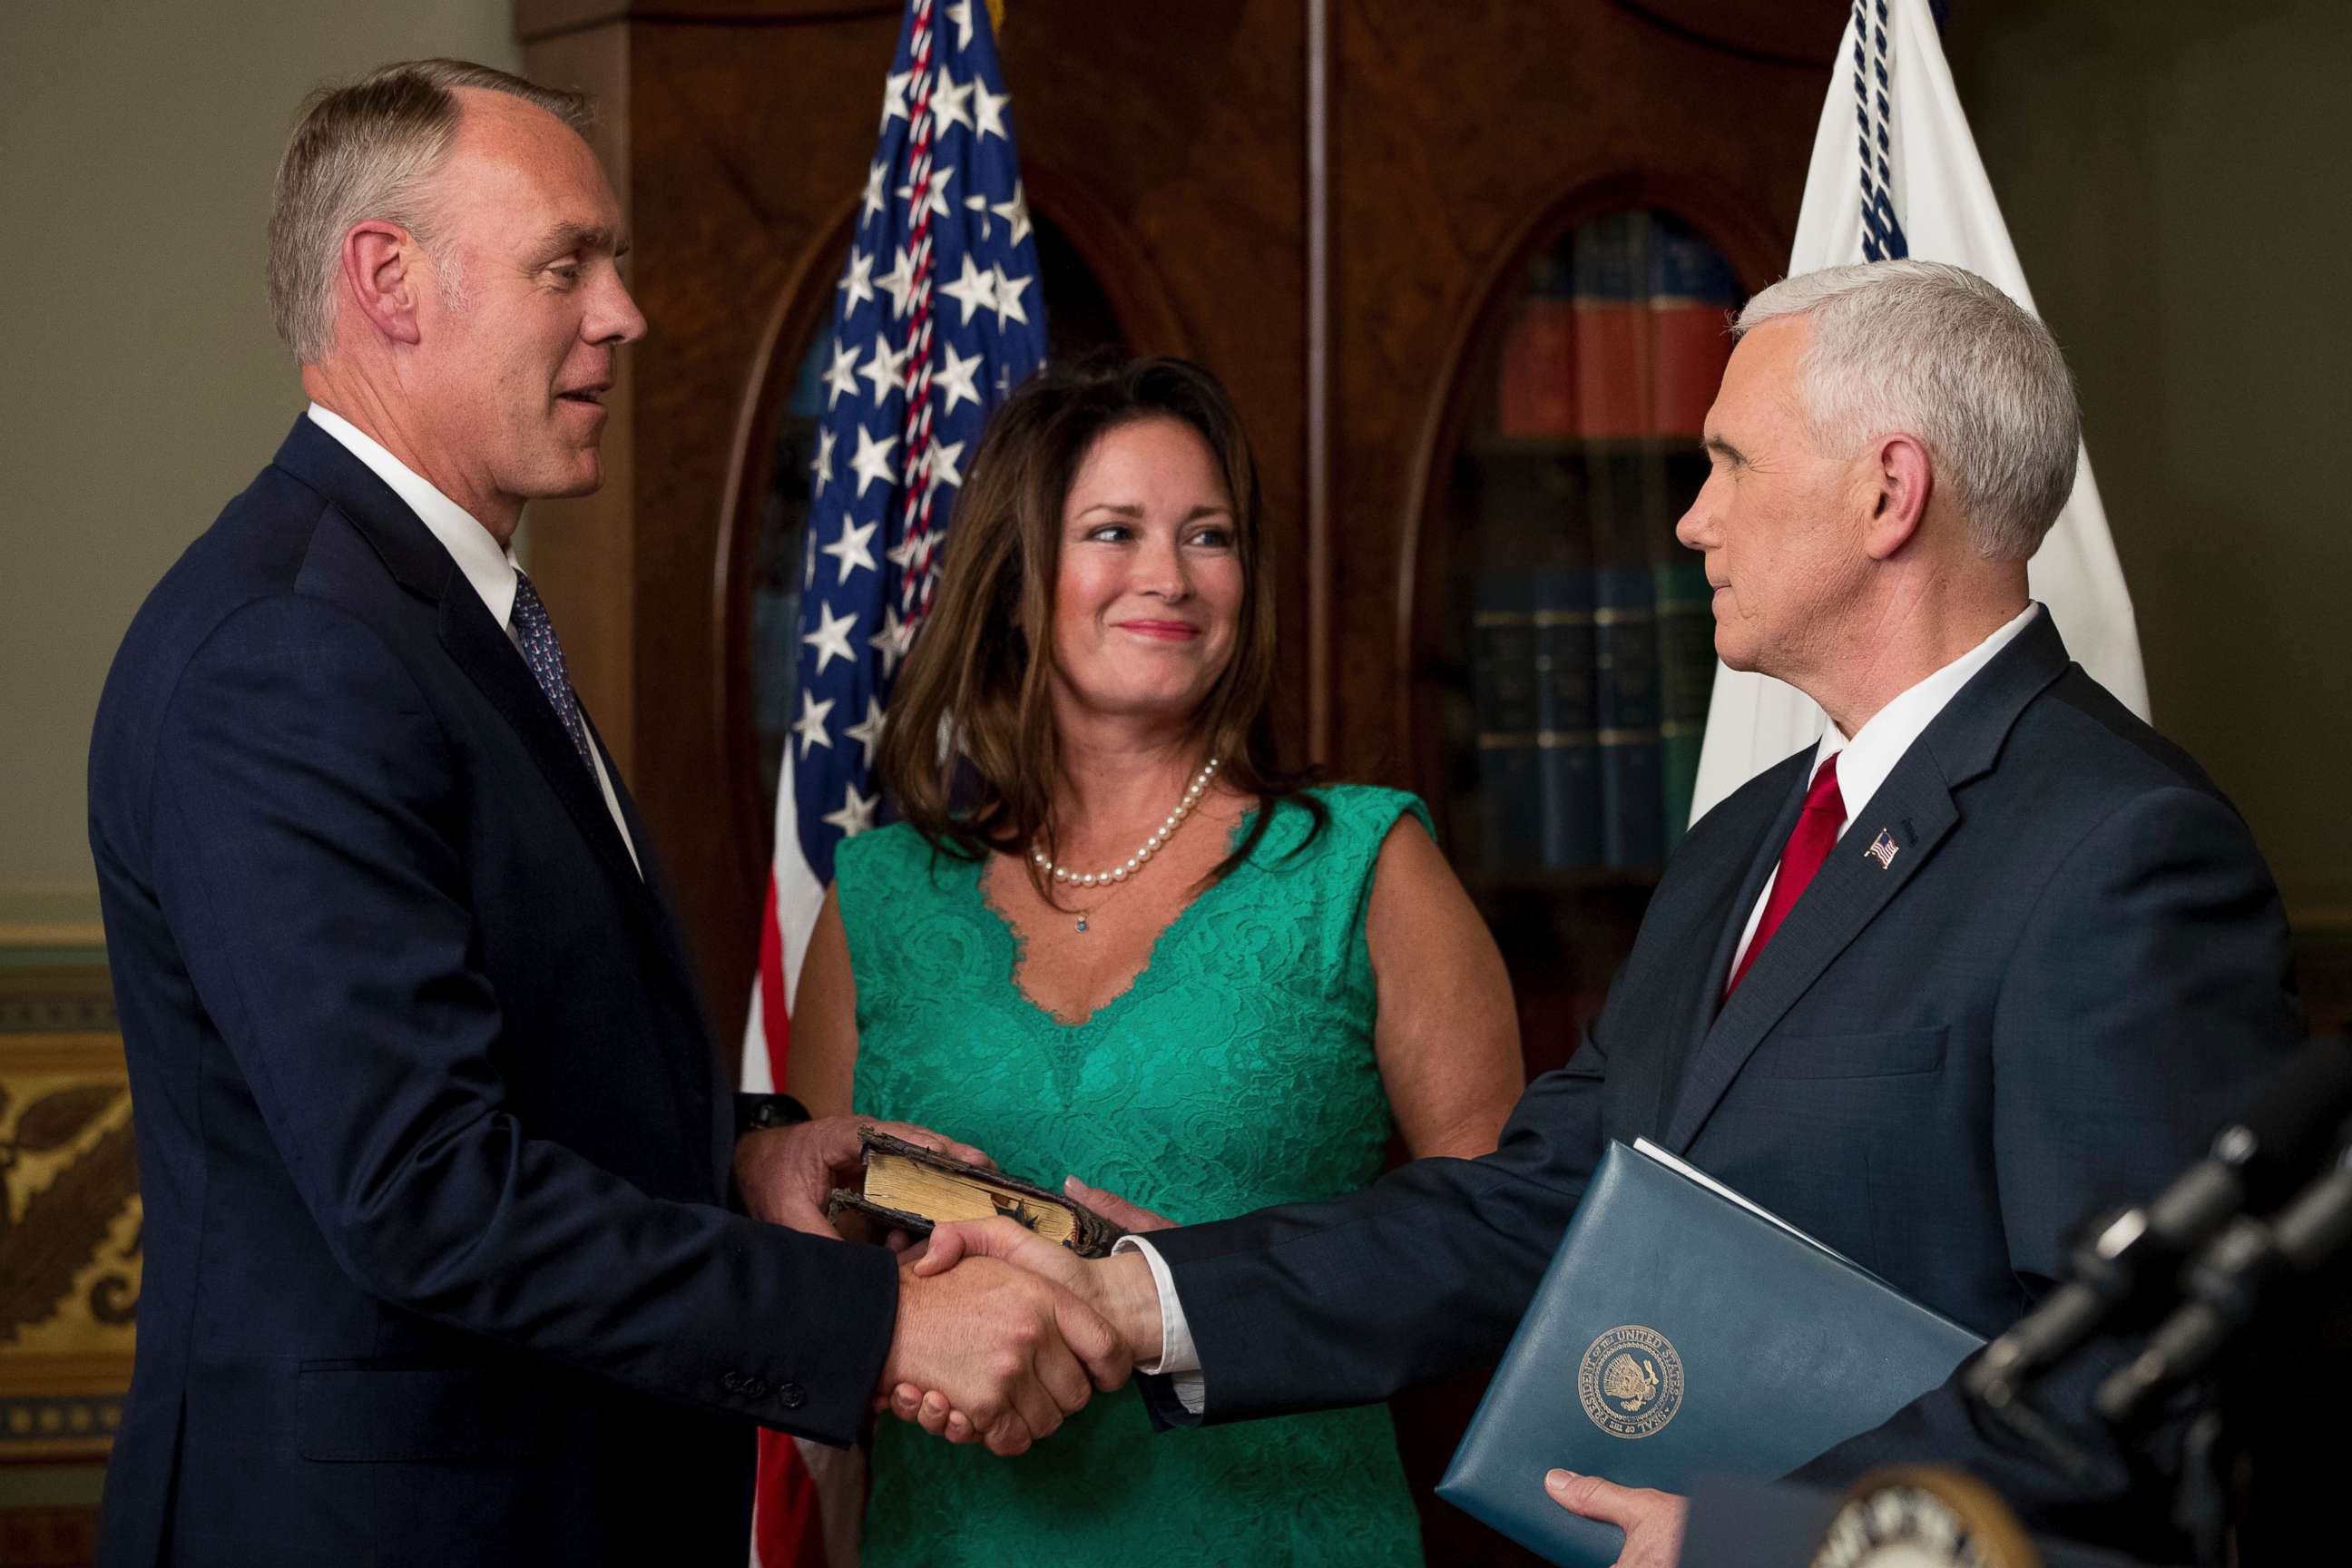 PHOTO: Vice President Mike Pence, right, shakes hands after administering the oath of office to Interior Secretary Ryan Zinke, left, with his wife Lolita Hand, center, March 1, 2017, in the Eisenhower Executive Office Building on the White House complex. 